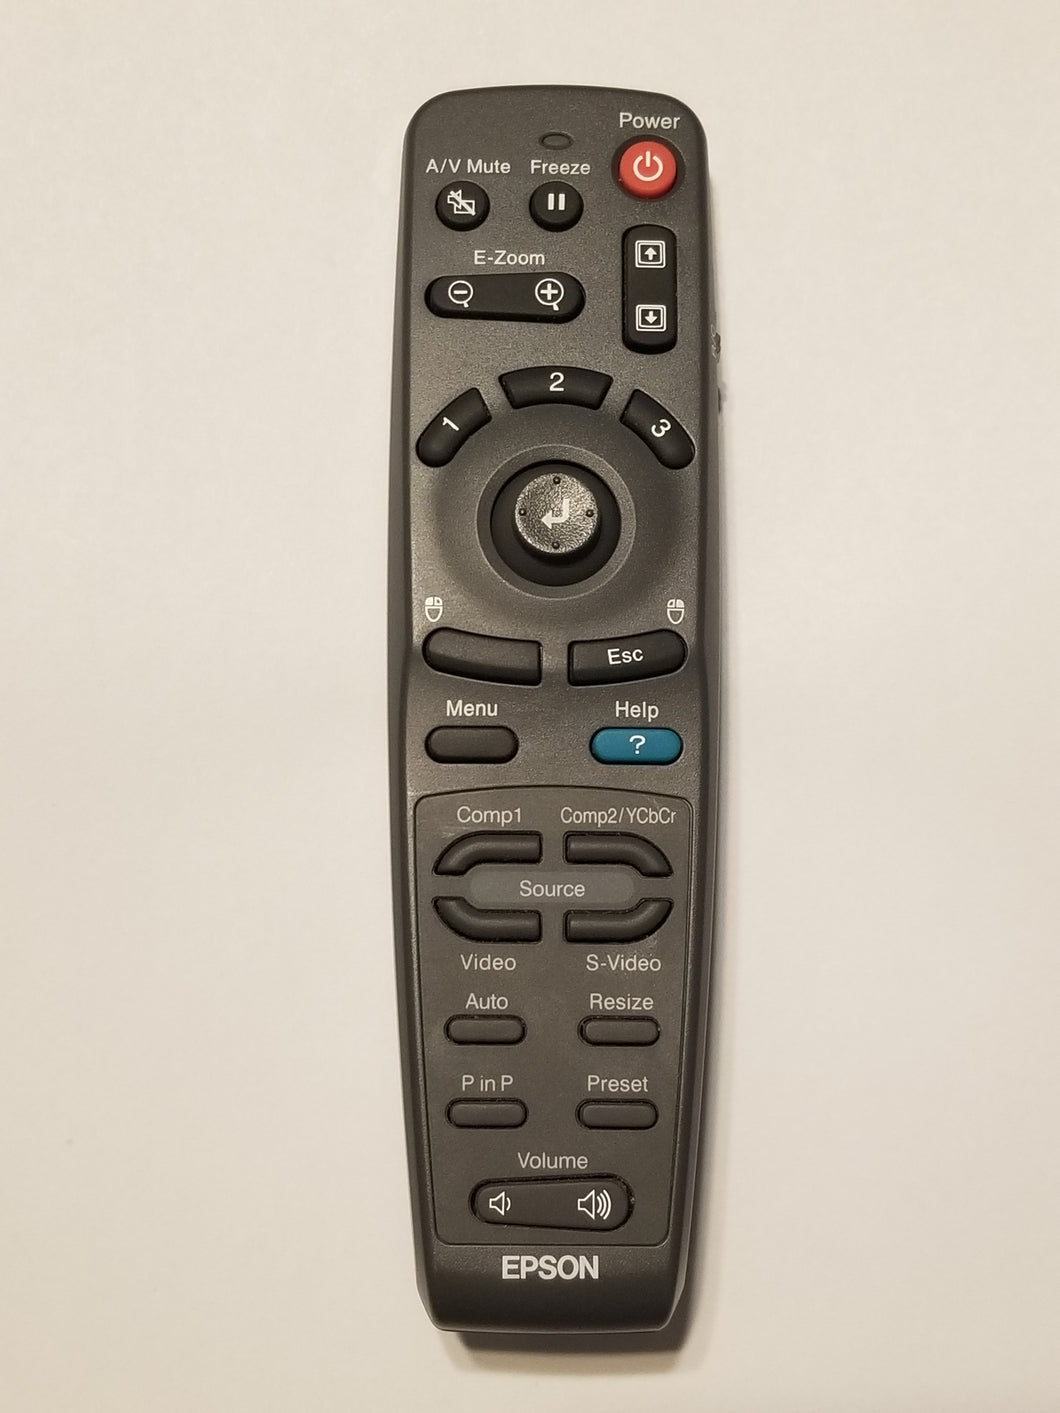 6006170 Epson Video Projector Remote Control front view